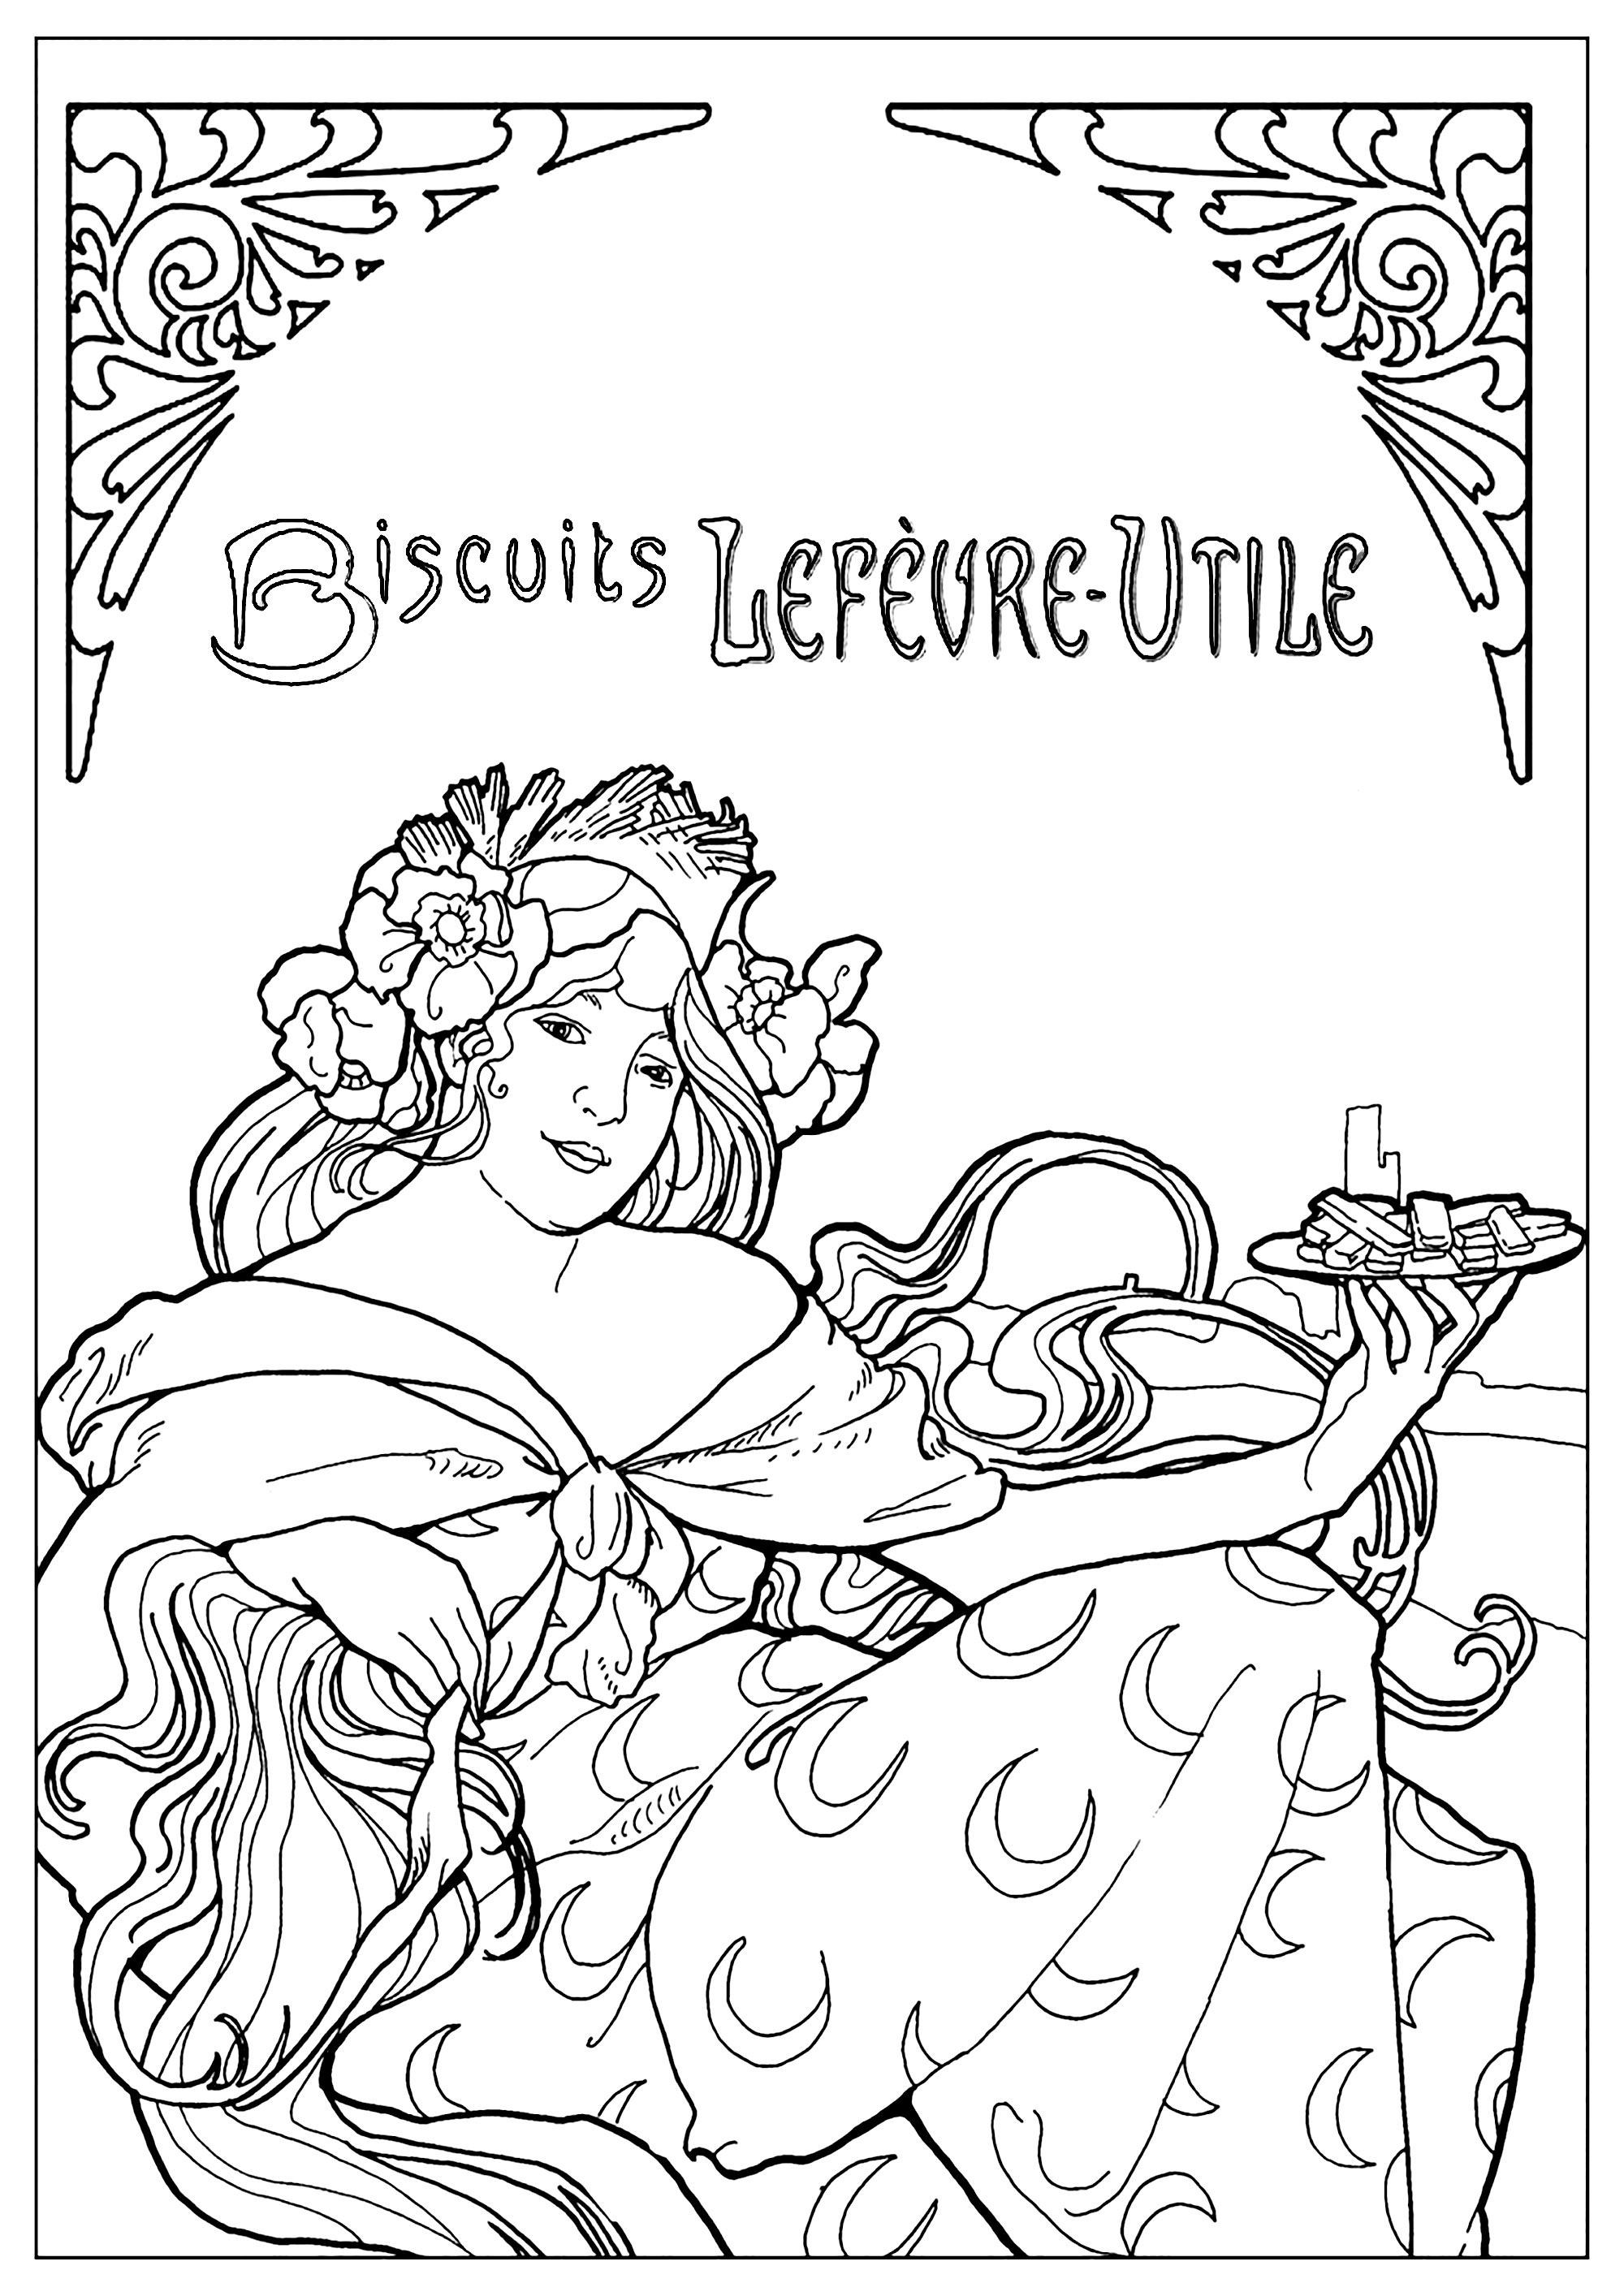 Advertising Lefèvre Utile Biscuits by Alfons Mucha